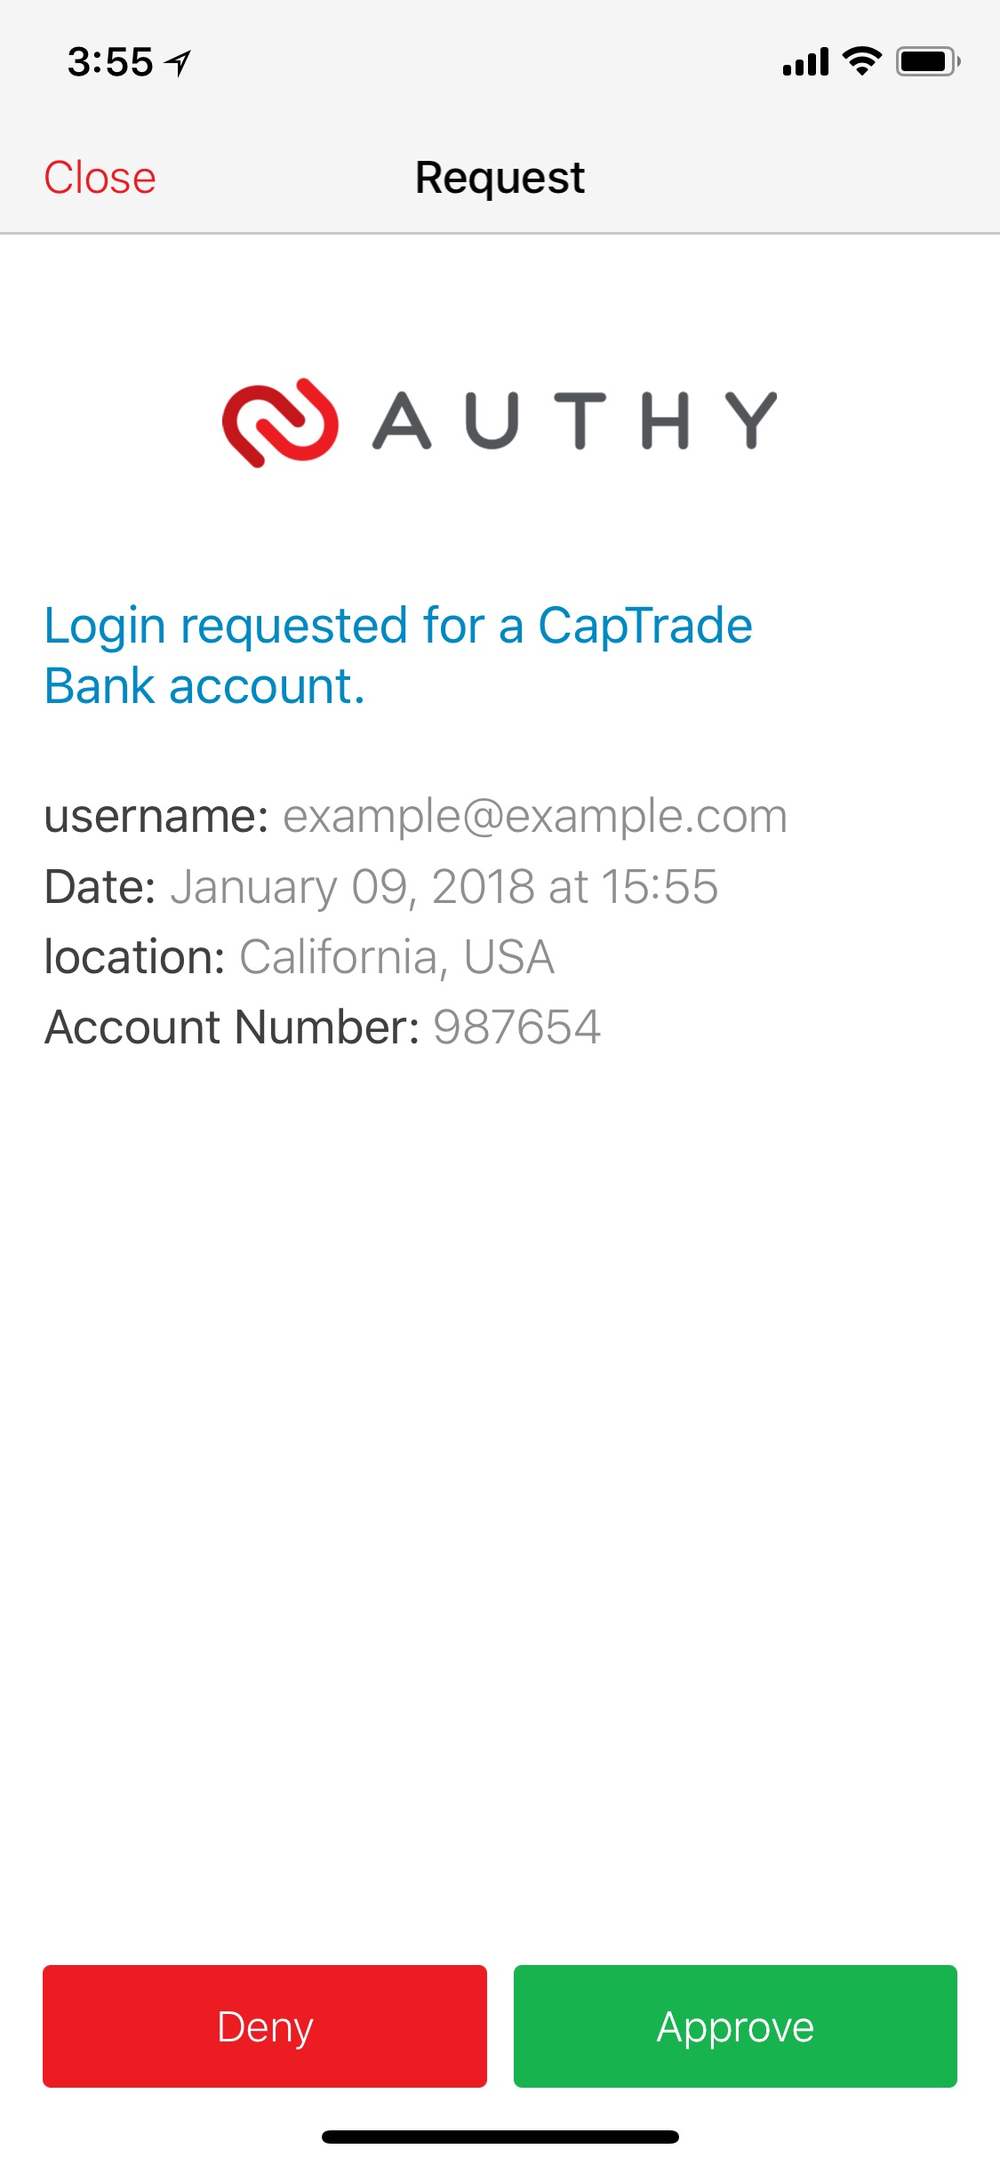 Authy push authentication request from Cap Trade bank.